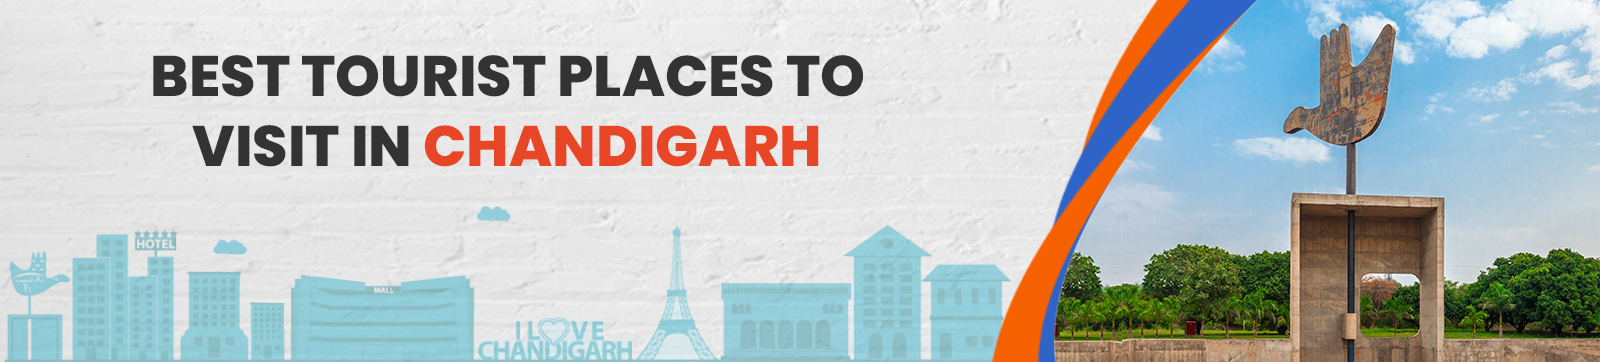 11 Best Tourist Places to Visit in Chandigarh